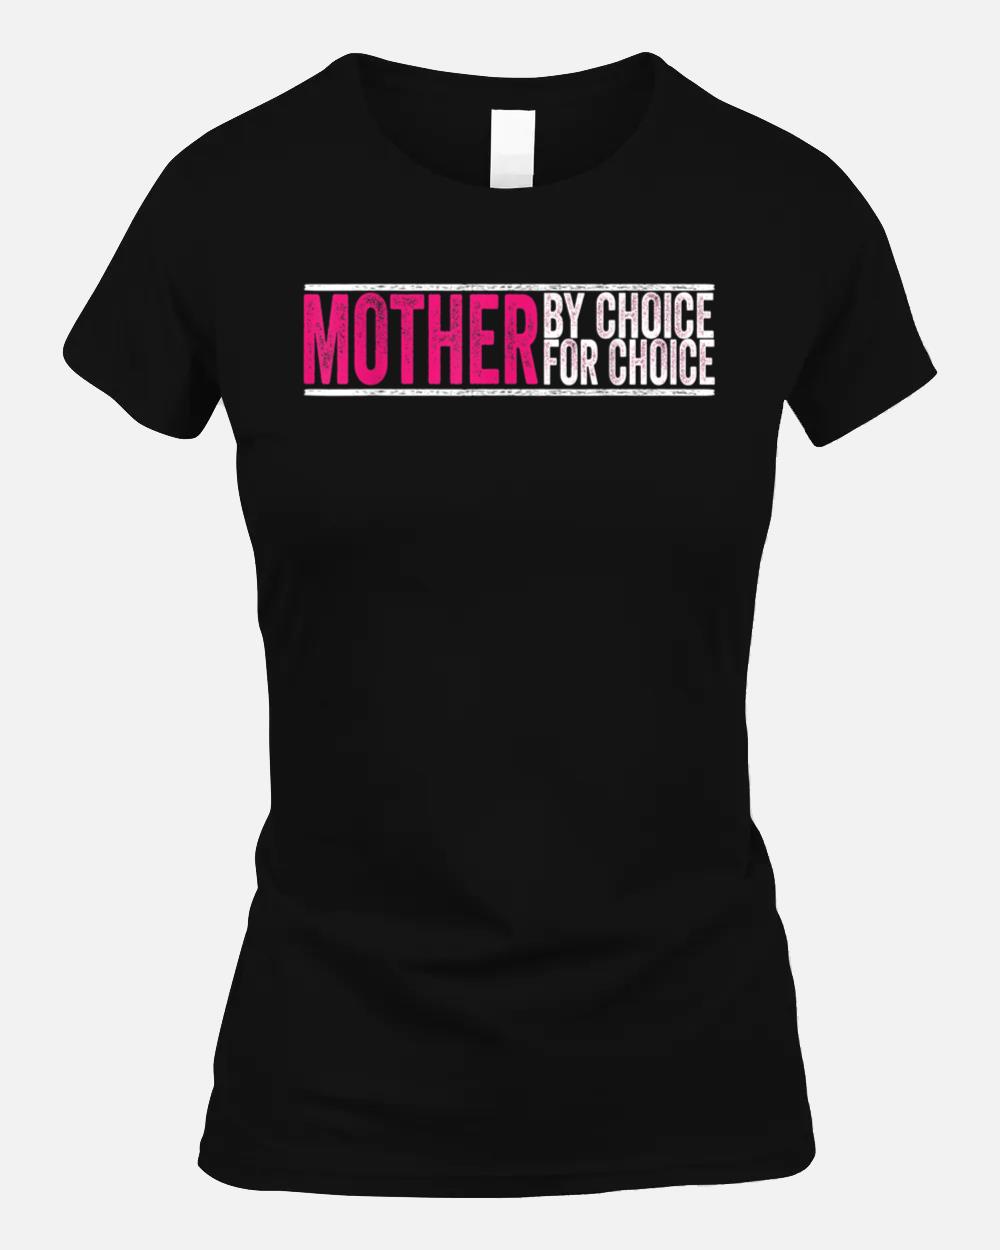 Mother By Choice For Choice Pro Choice Feminist Rights (2) Unisex T-Shirt